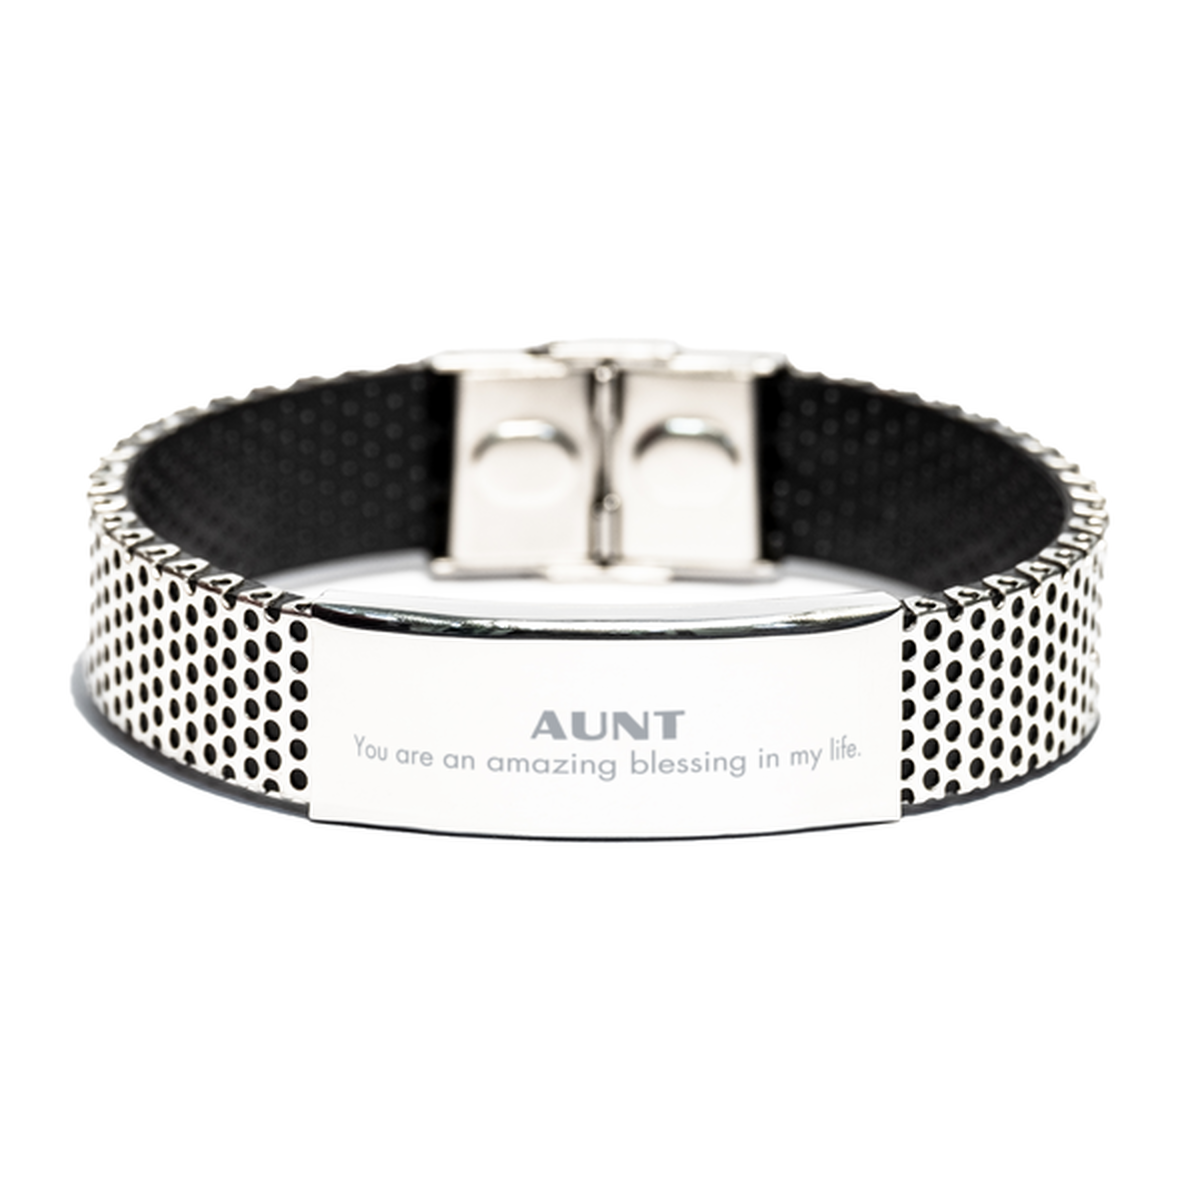 Aunt Stainless Steel Bracelet, You are an amazing blessing in my life, Thank You Gifts For Aunt, Inspirational Birthday Christmas Unique Gifts For Aunt